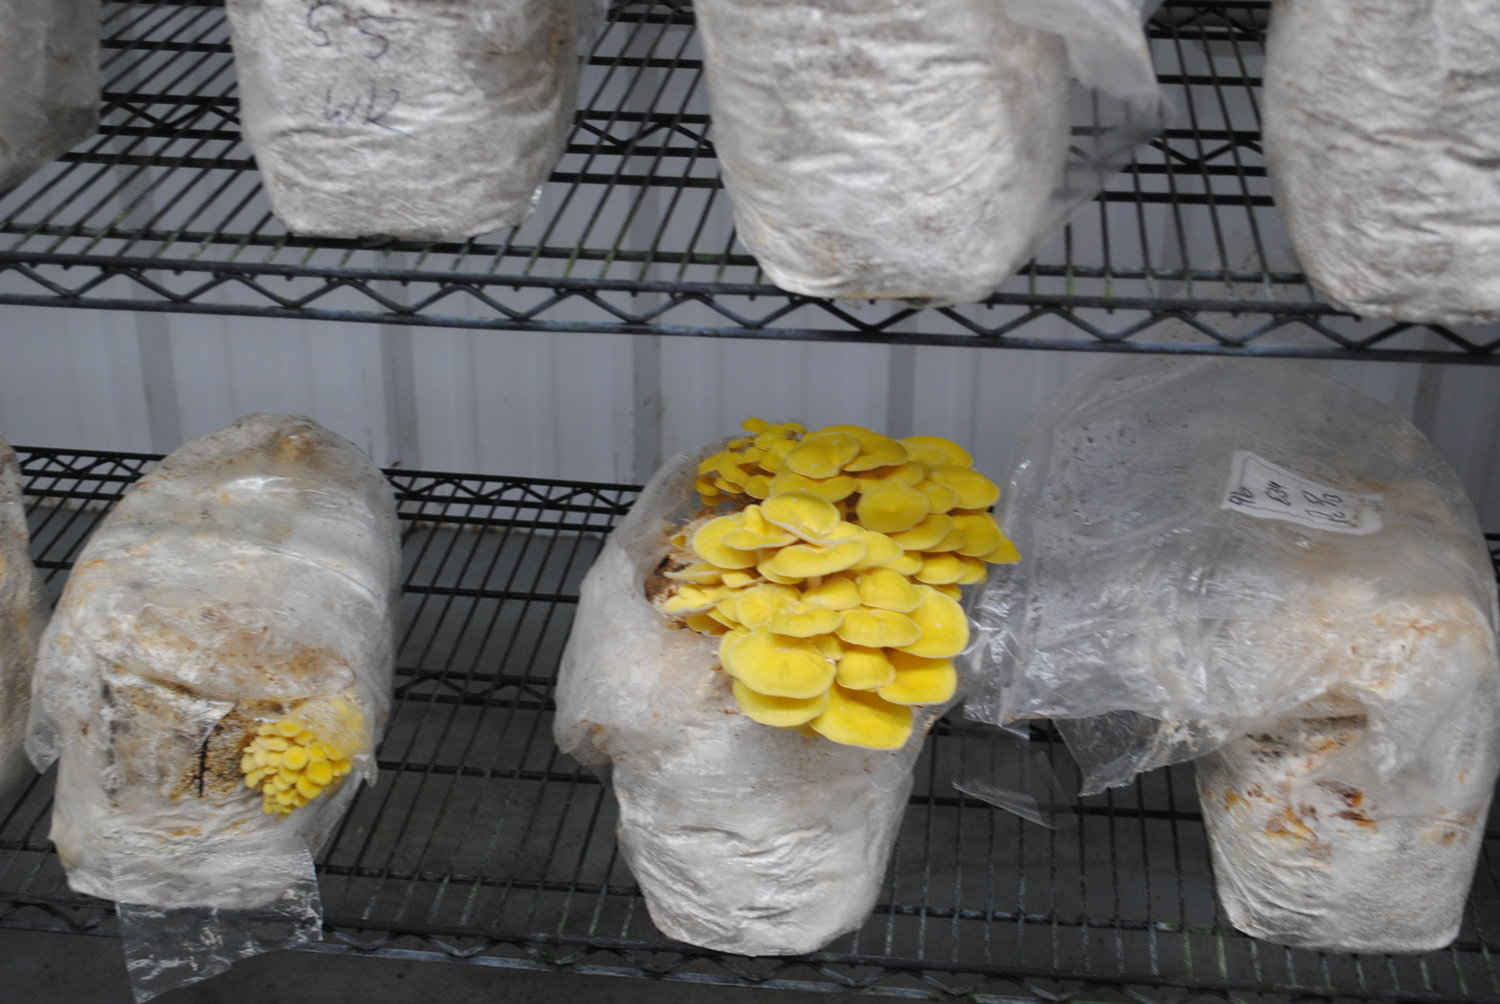 Golden oysters are one of the specialty mushrooms grown at the New York Mushroom Company in Lebanon.